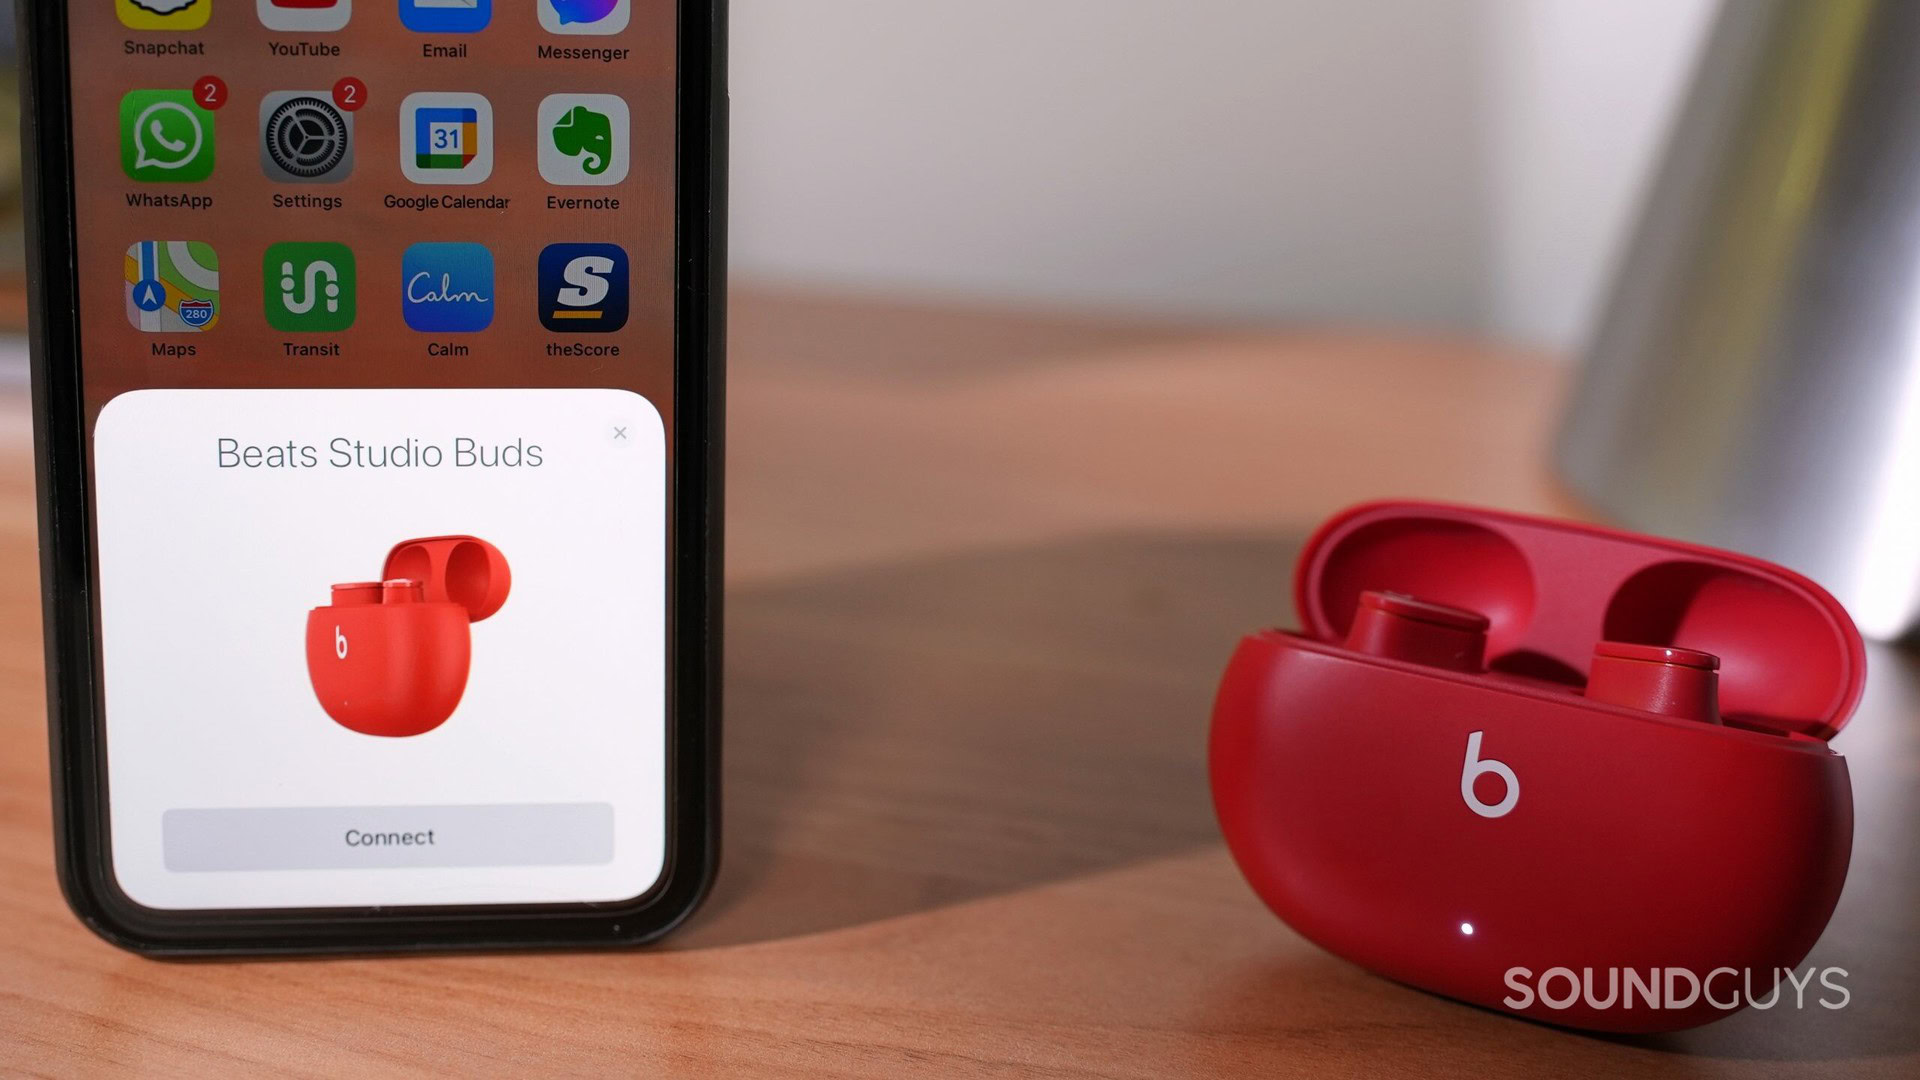 How to Connect Beats Wireless Headphones to an iPhone